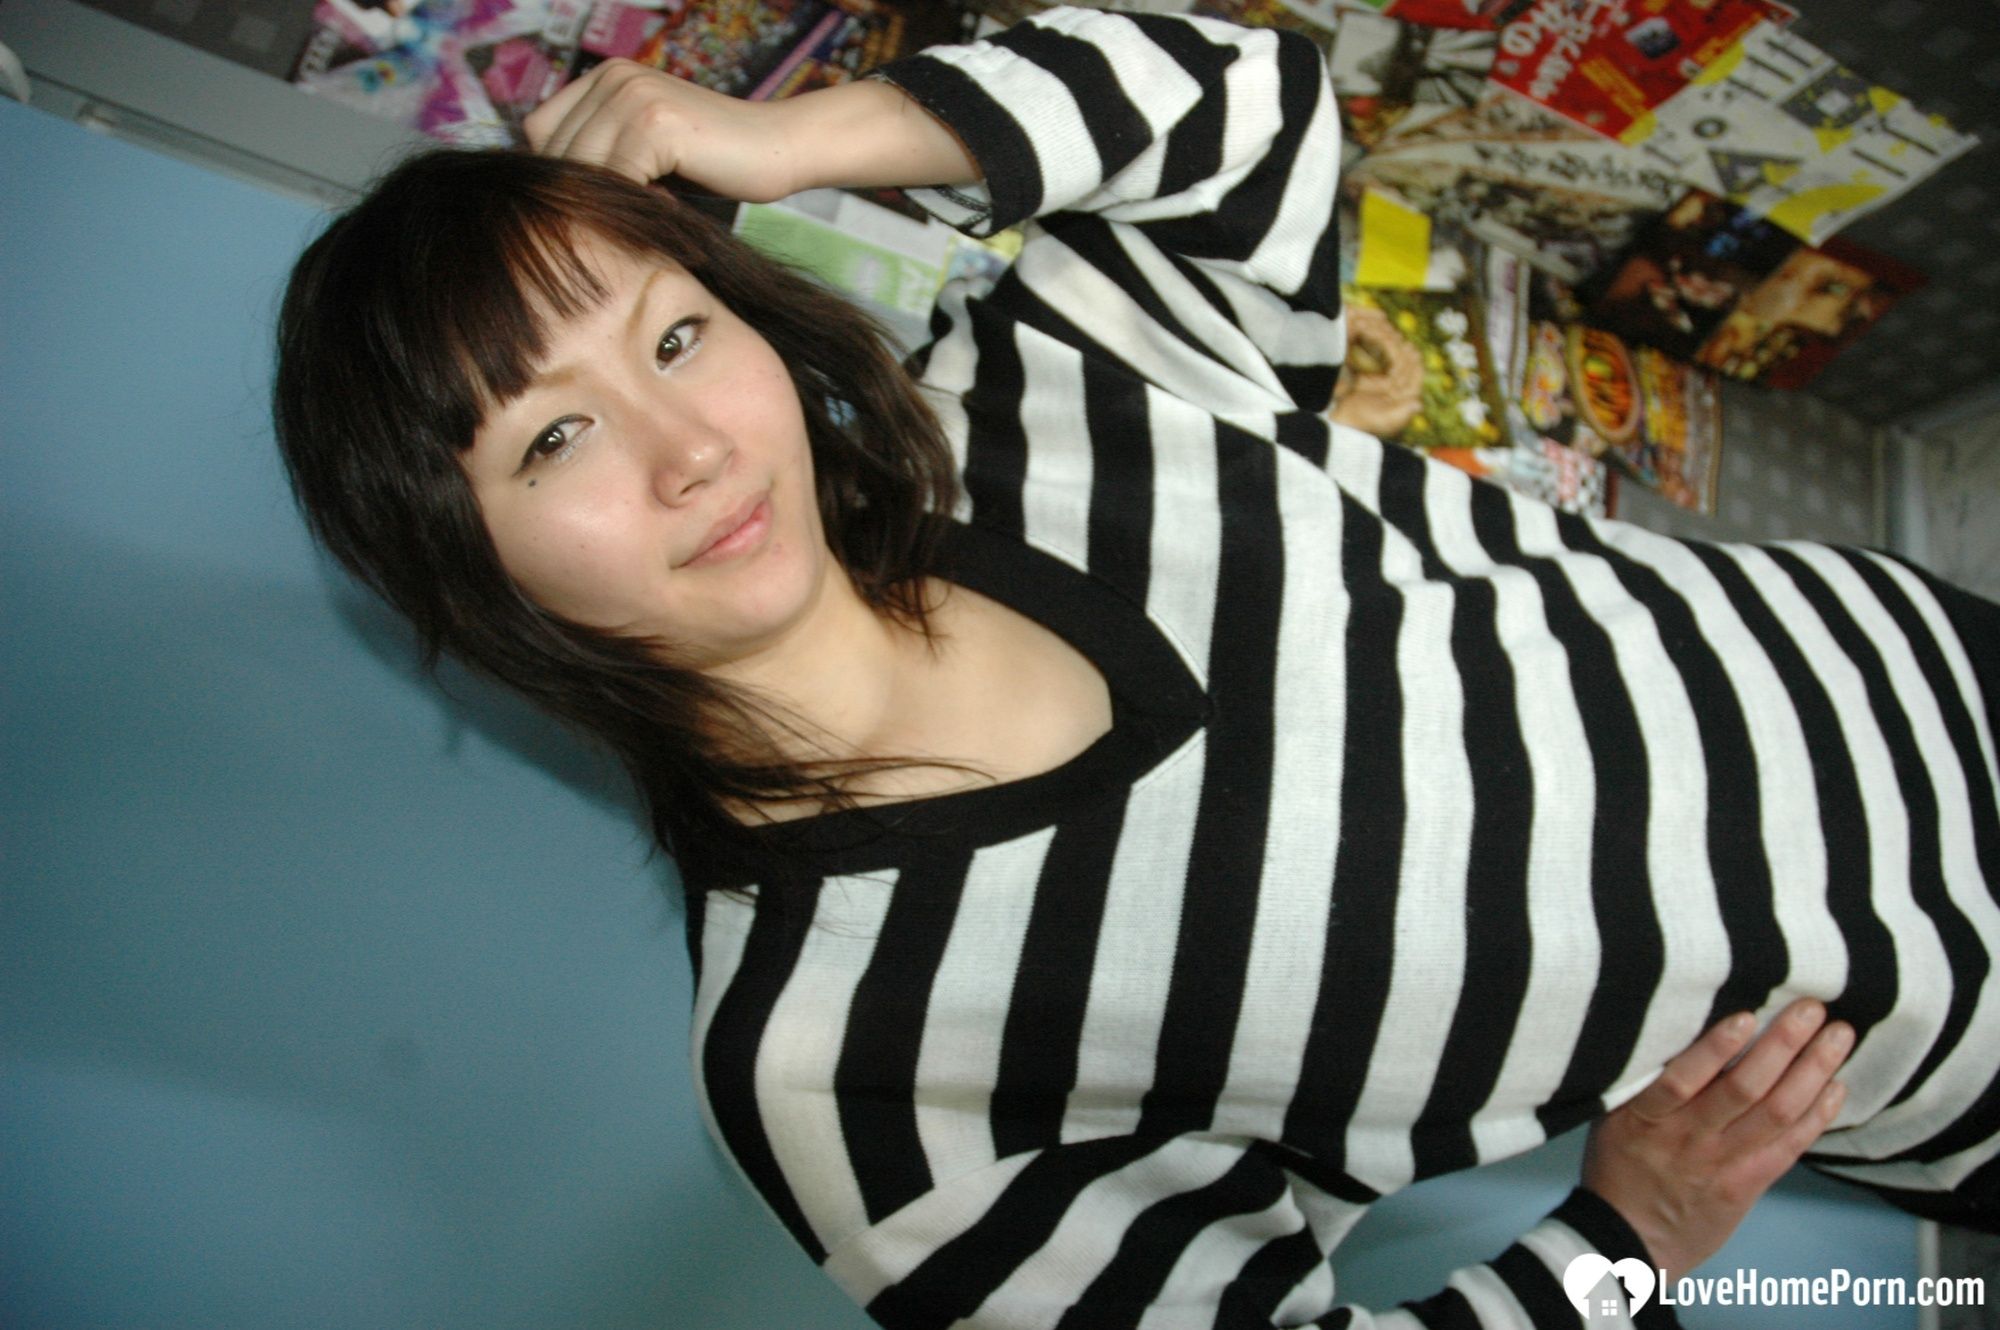 Hot Asian strips pantyhose and does sexy poses #15